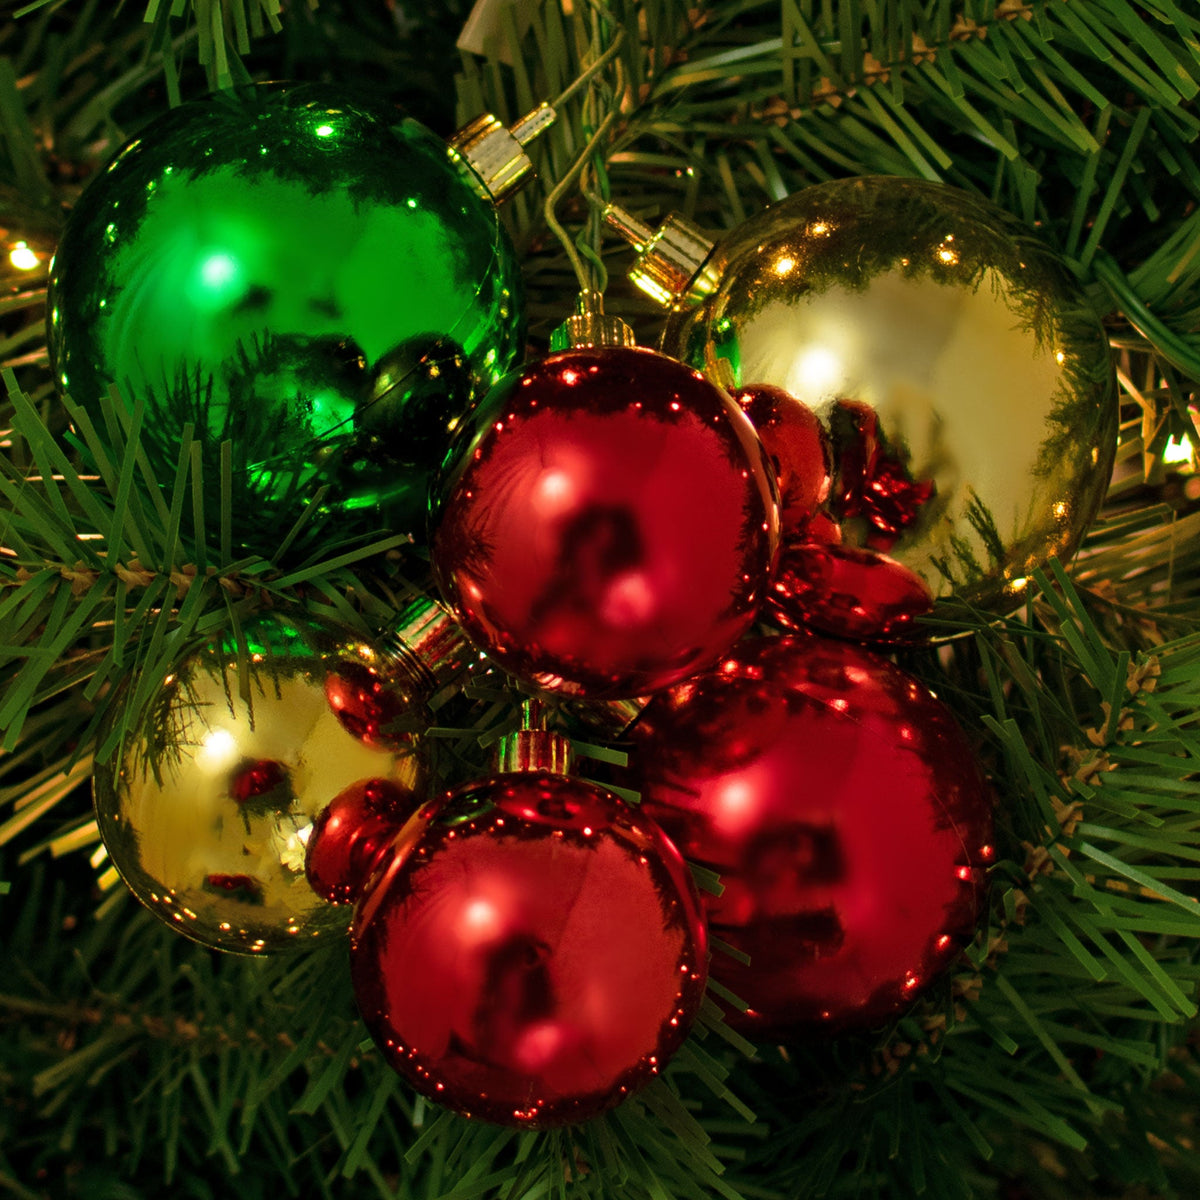 The Classic Christmas Ball Ornament Cluster with Shiny Red, Gold, and Green Ball Ornaments are perfect for decorating your Christmas Tree